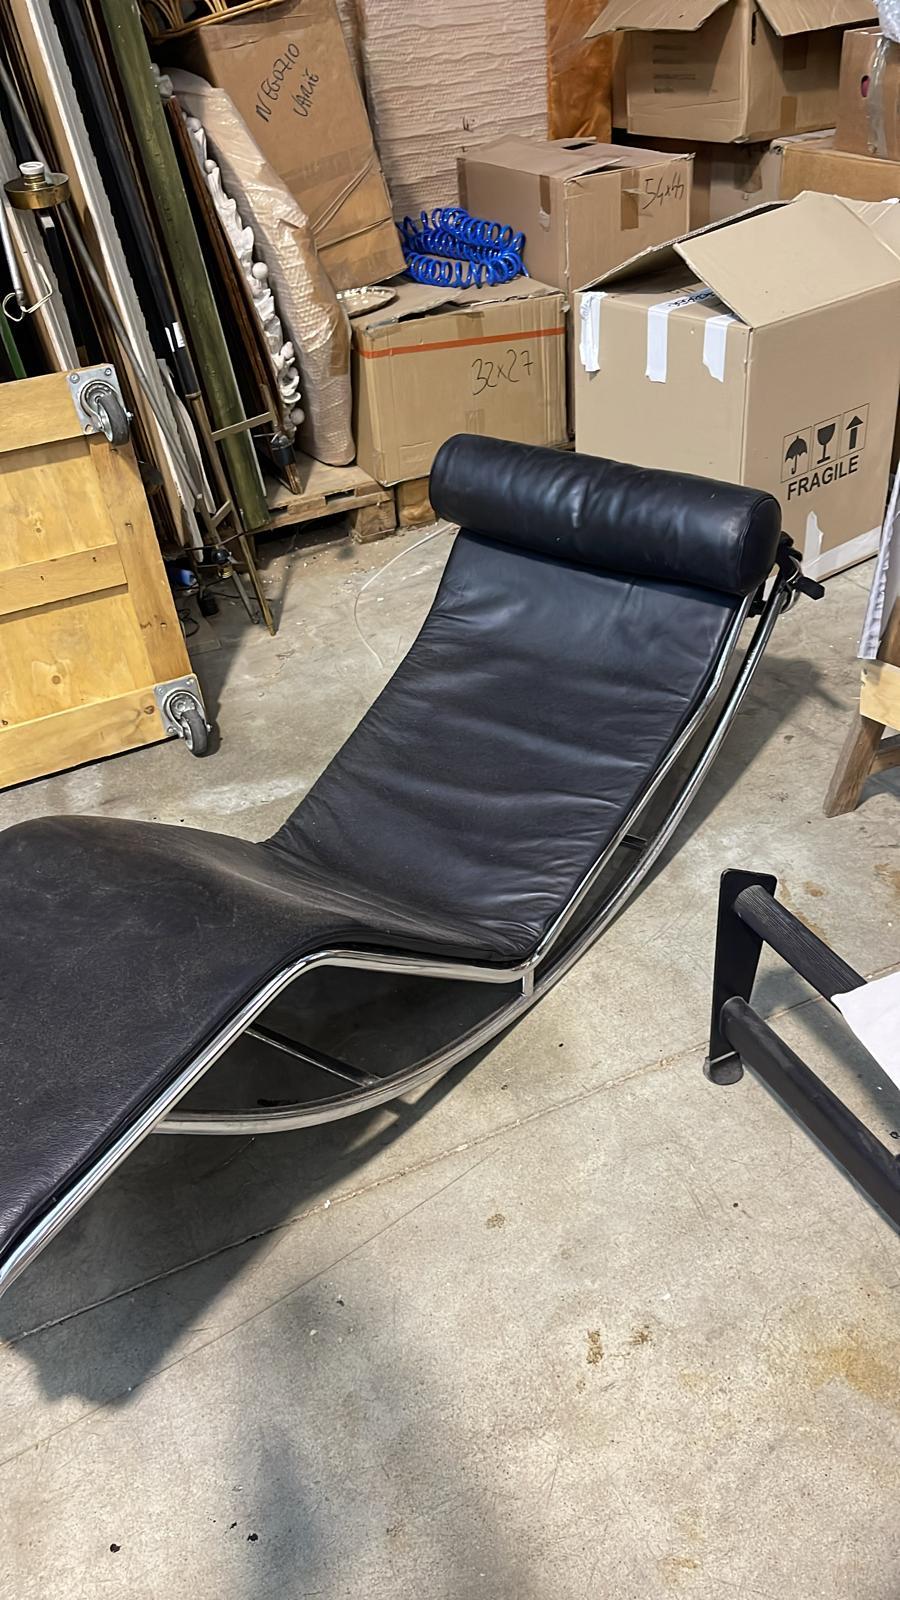 LC 4 Chaise-Longue Quattrifolio Italy 1970s Black Leather For Sale 3